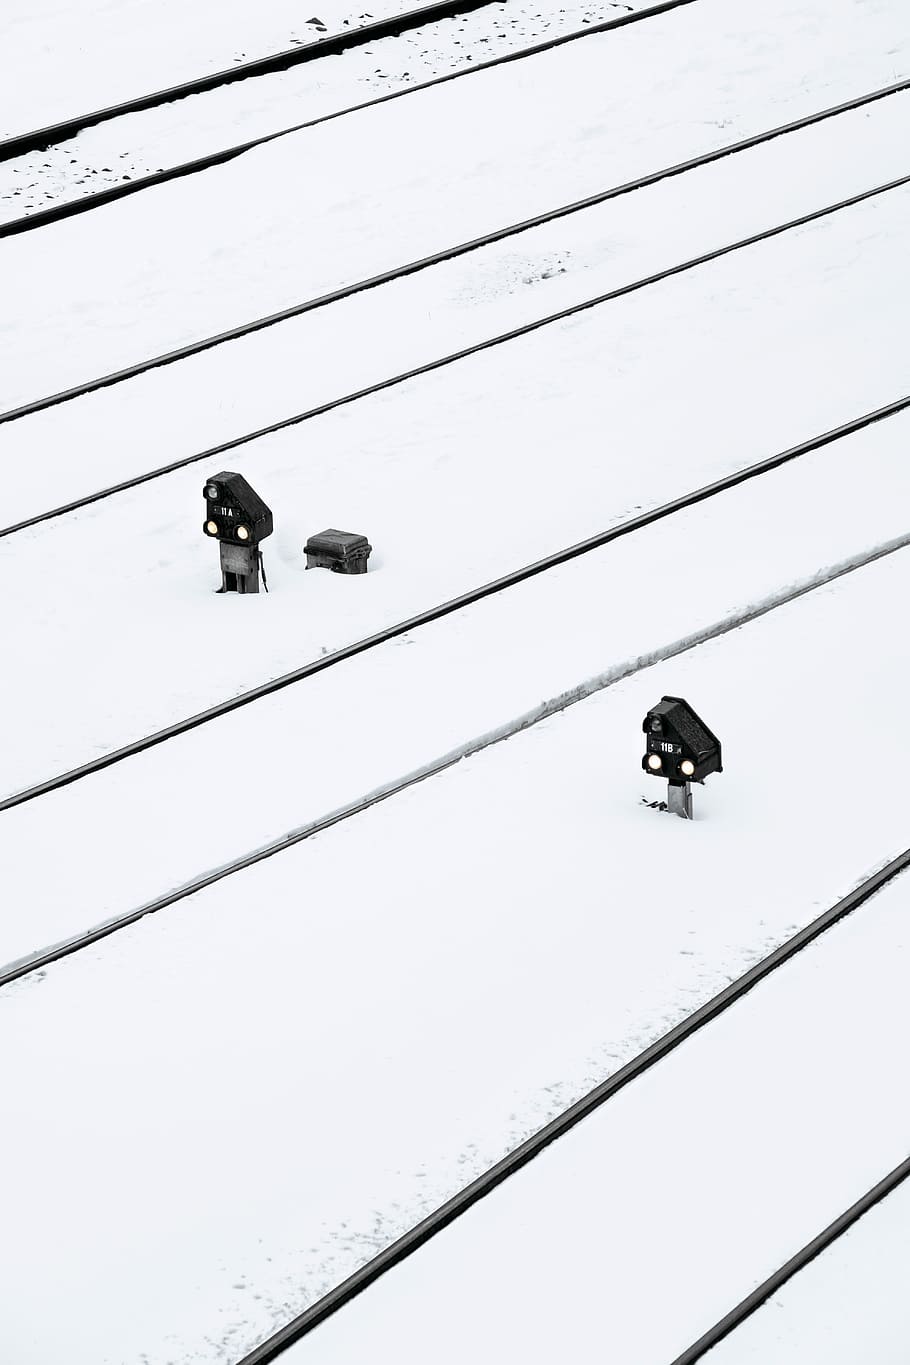 Train tracks under the heavy snow, two black-and-gray metal tools on the ground with snows, HD wallpaper